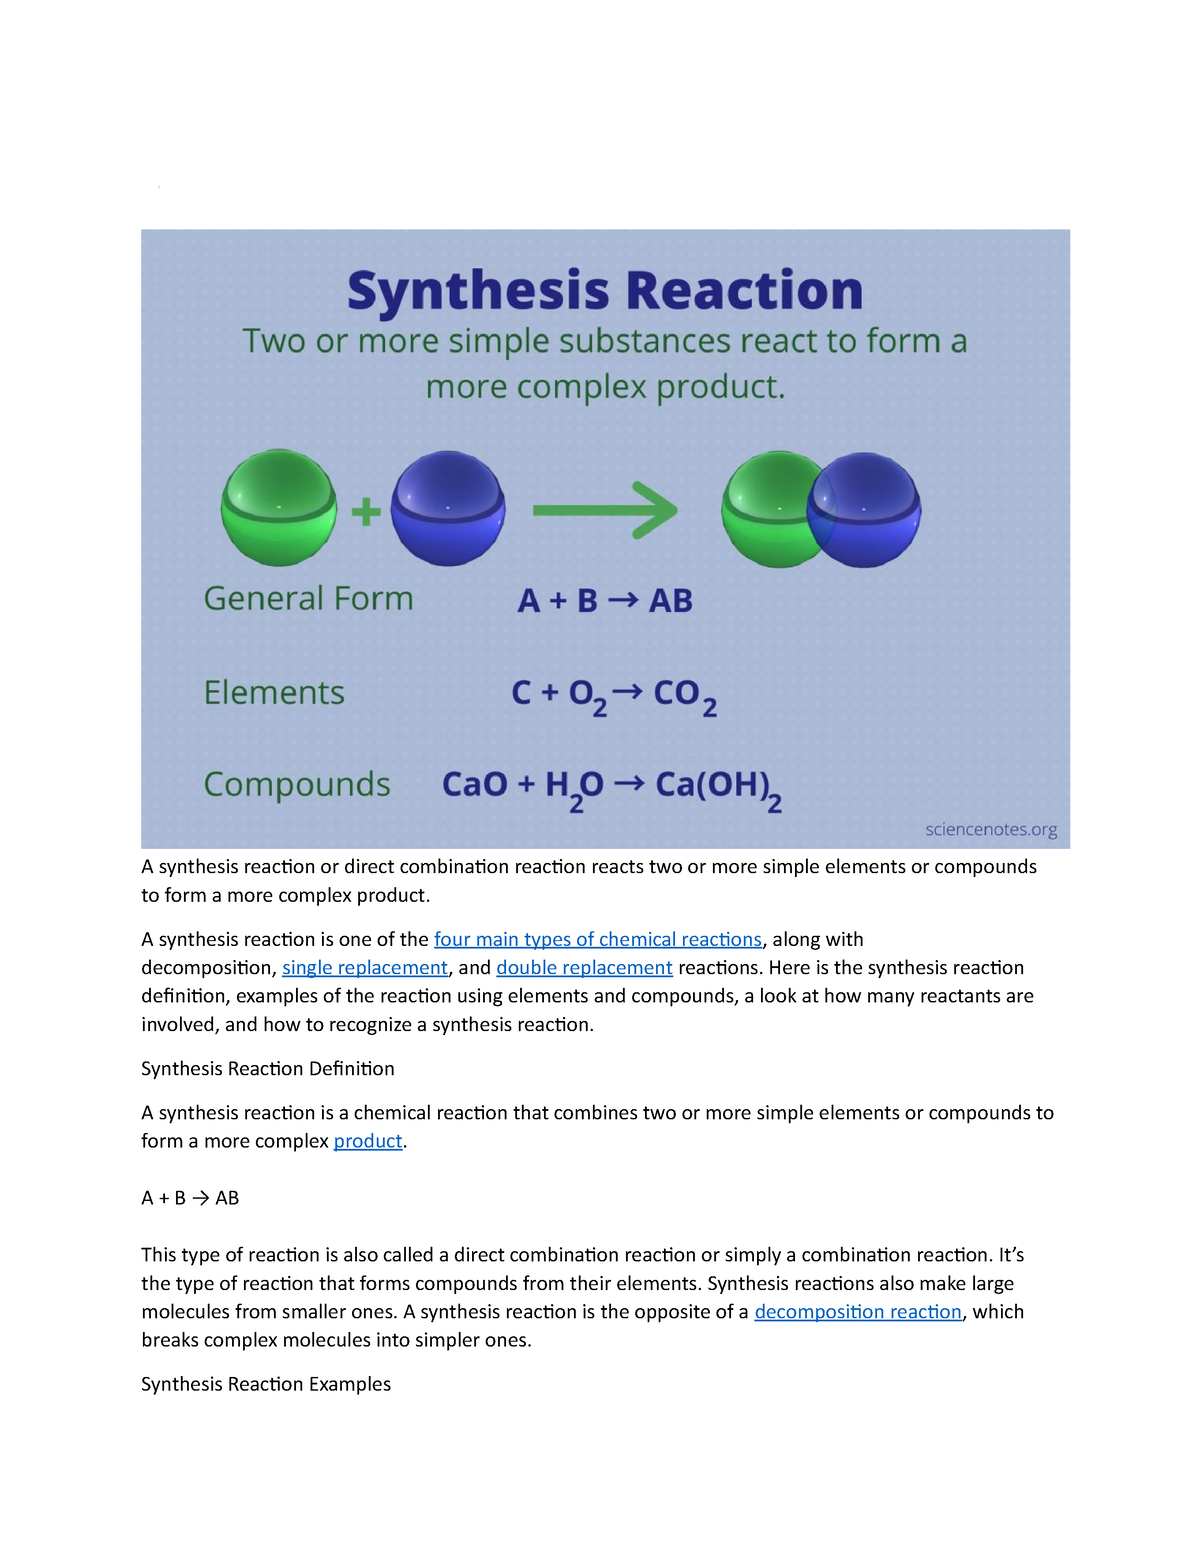 synthesis reaction definition